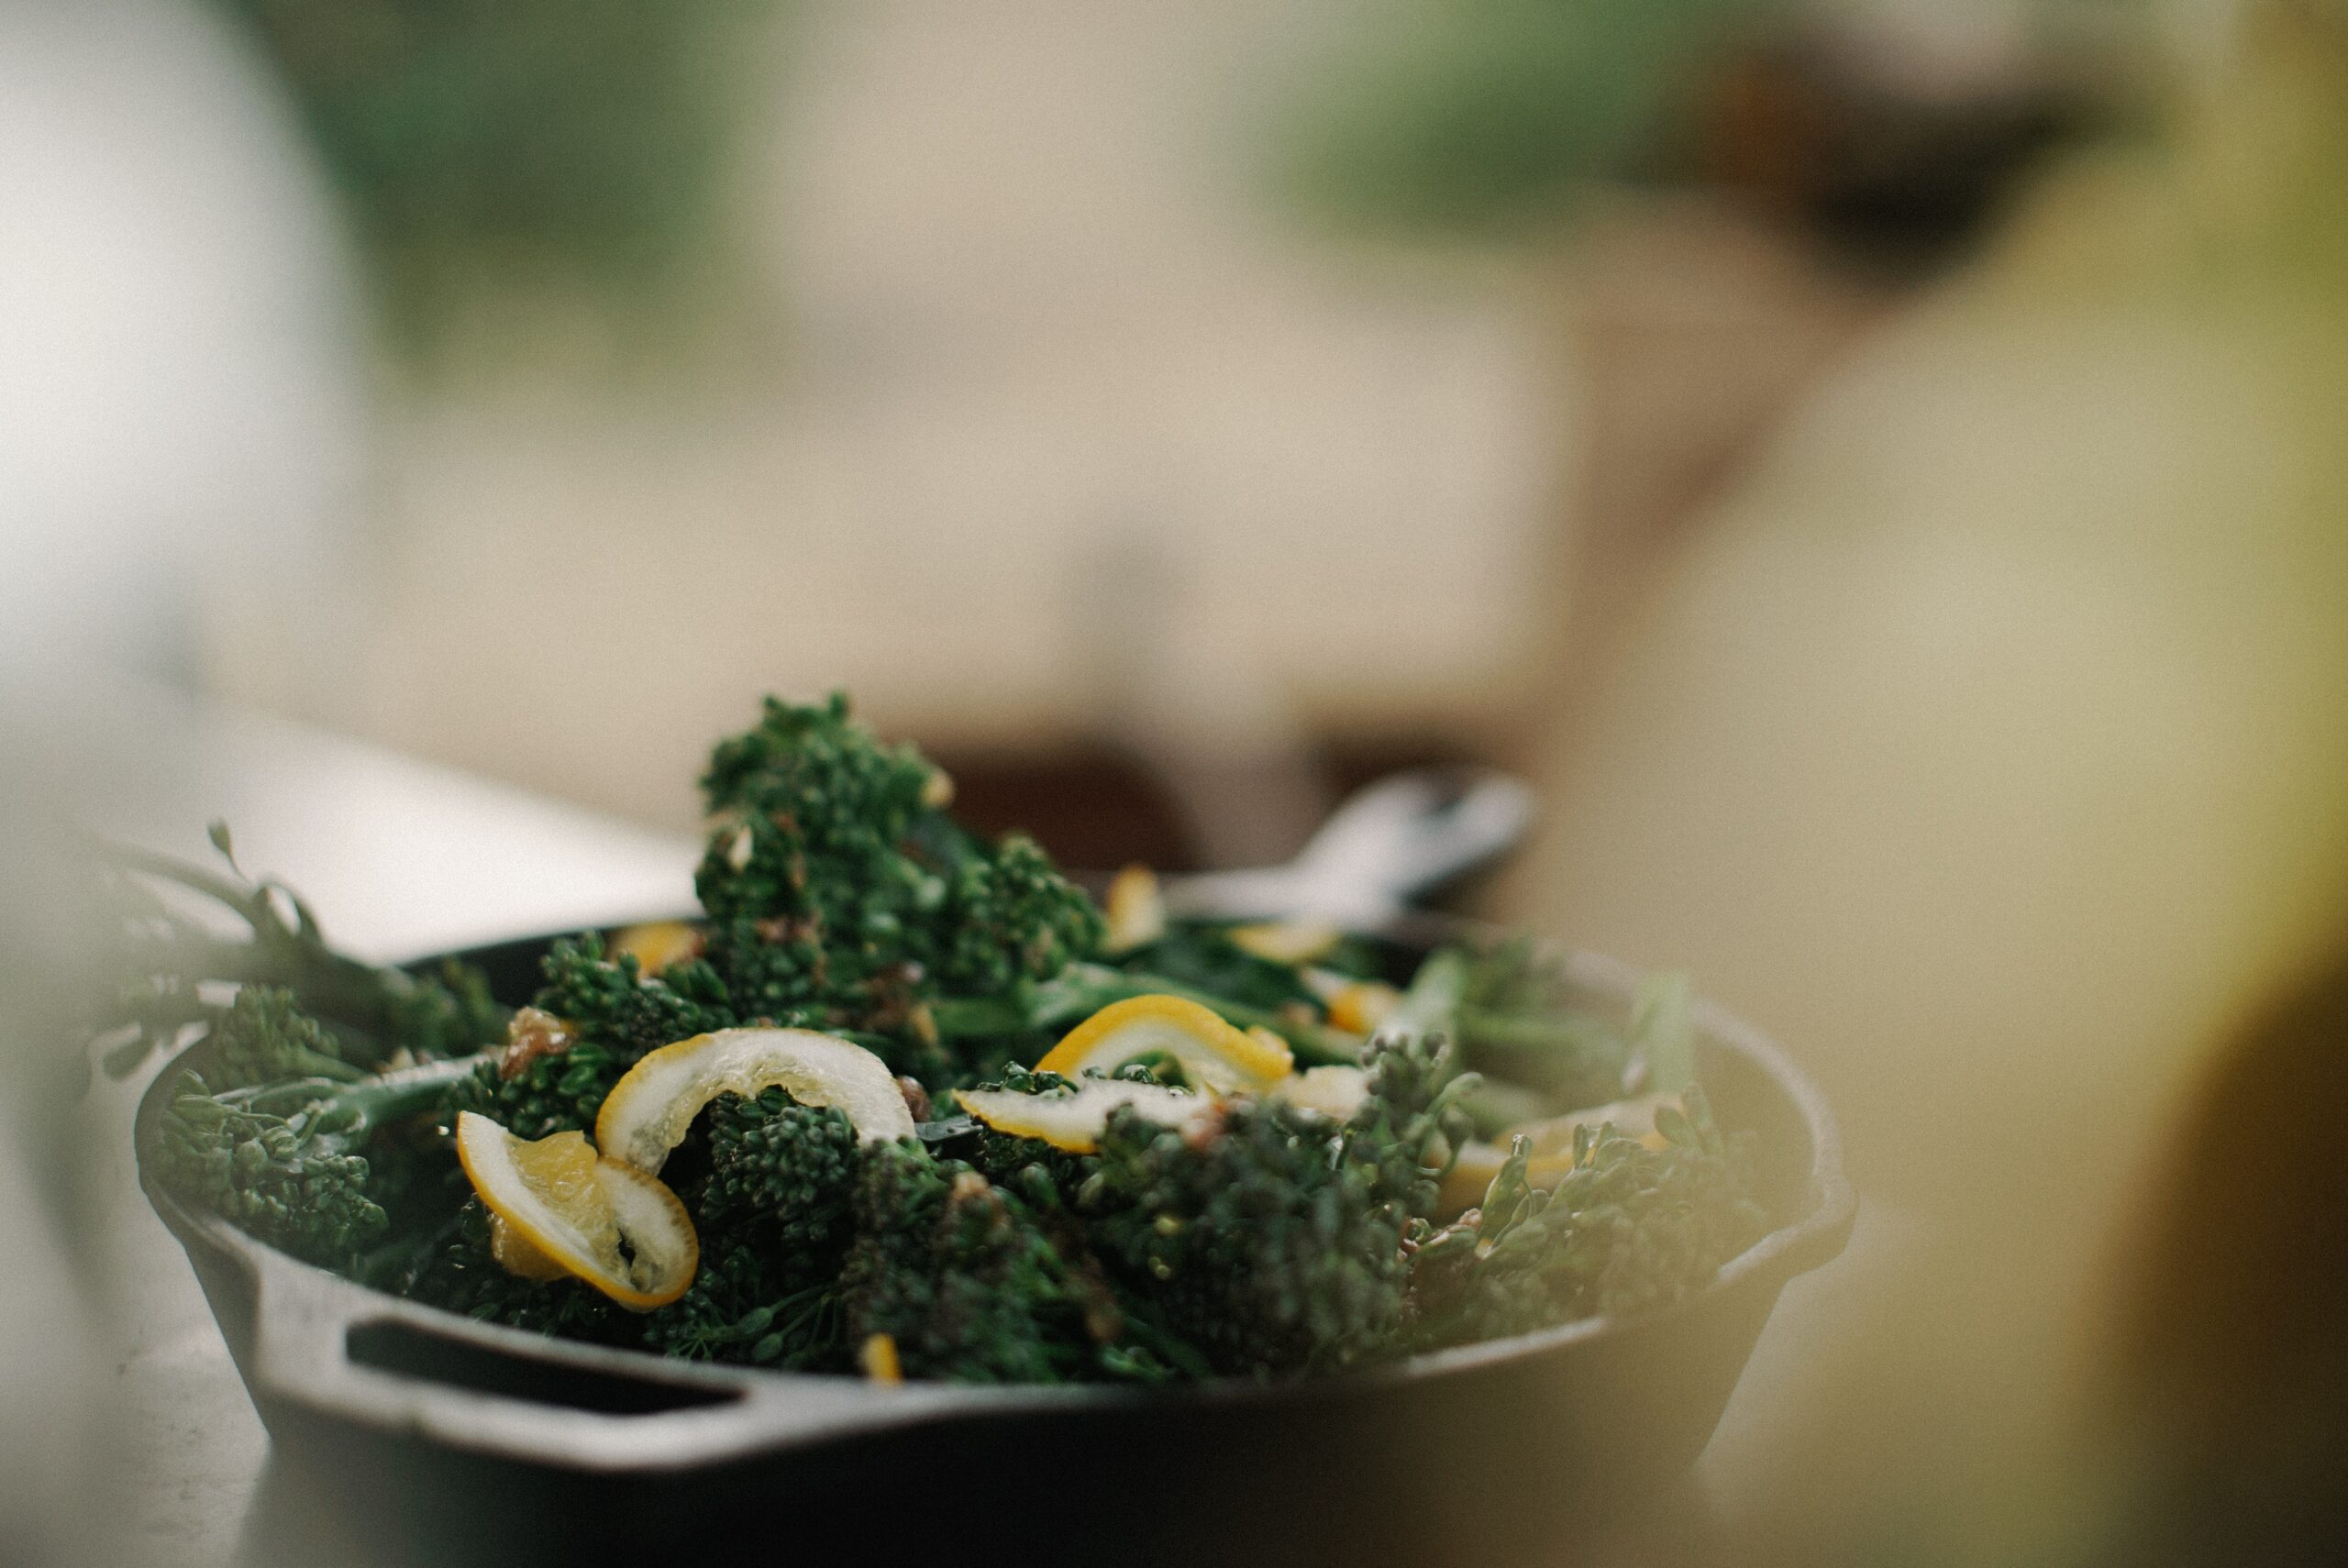 Steamed broccolini with lemon, toasted pine nuts, and extra virgin olive oil